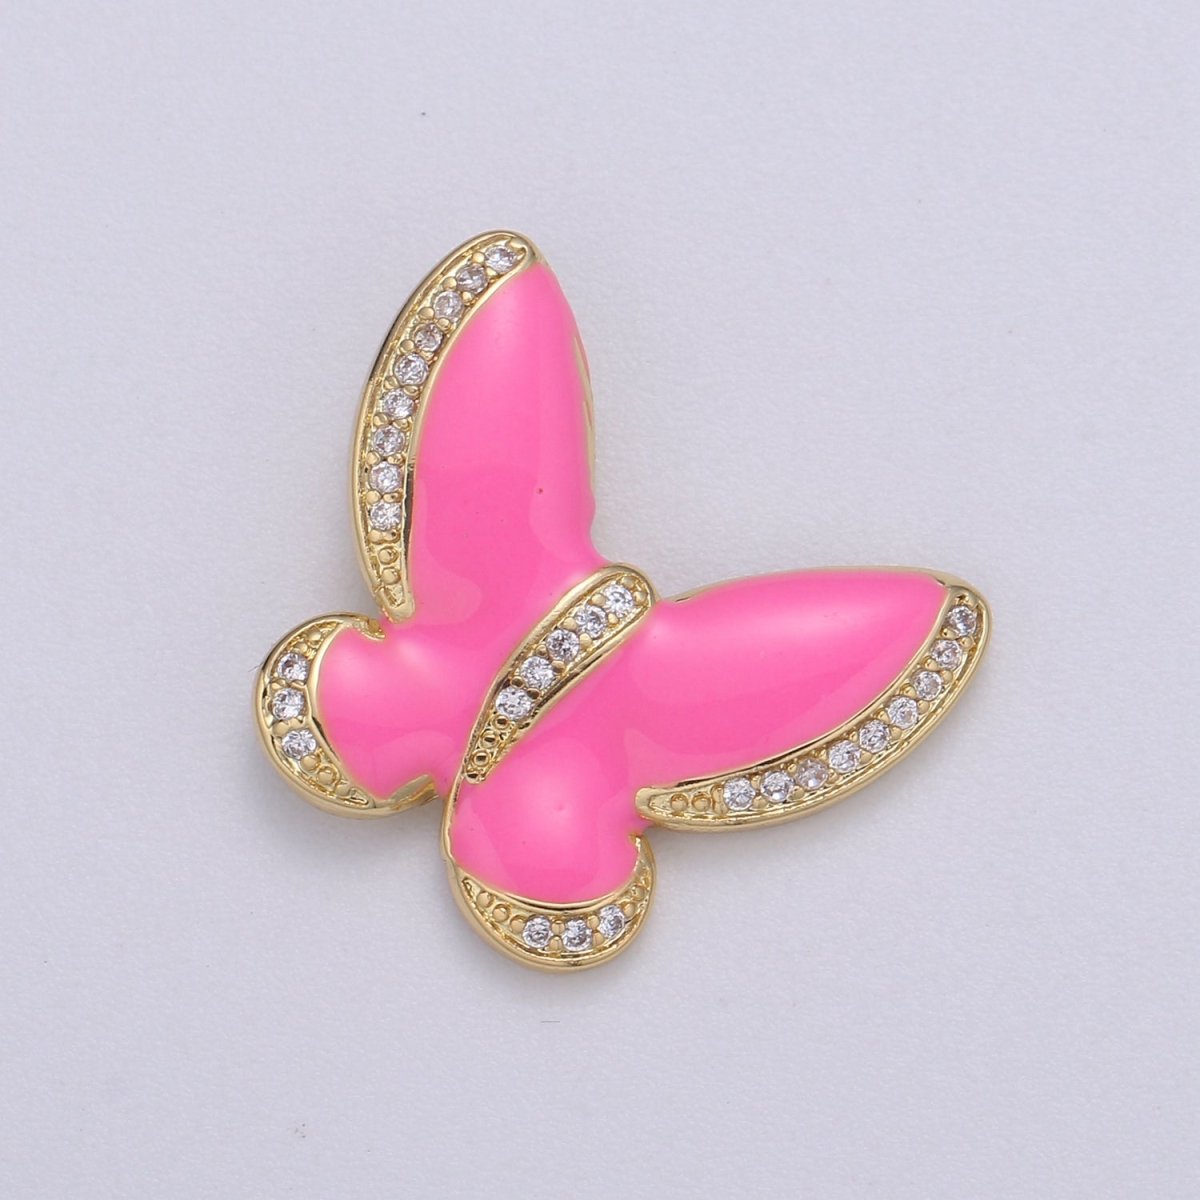 Enamel butterfly charm necklace Dainty Mariposa Charm Pendant for bracelet Jewelry Making Supply Blue, Black Pink Red White Evil Eye H-755 H-781 H-783 H-825 H-827 H-833 H-839 - DLUXCA